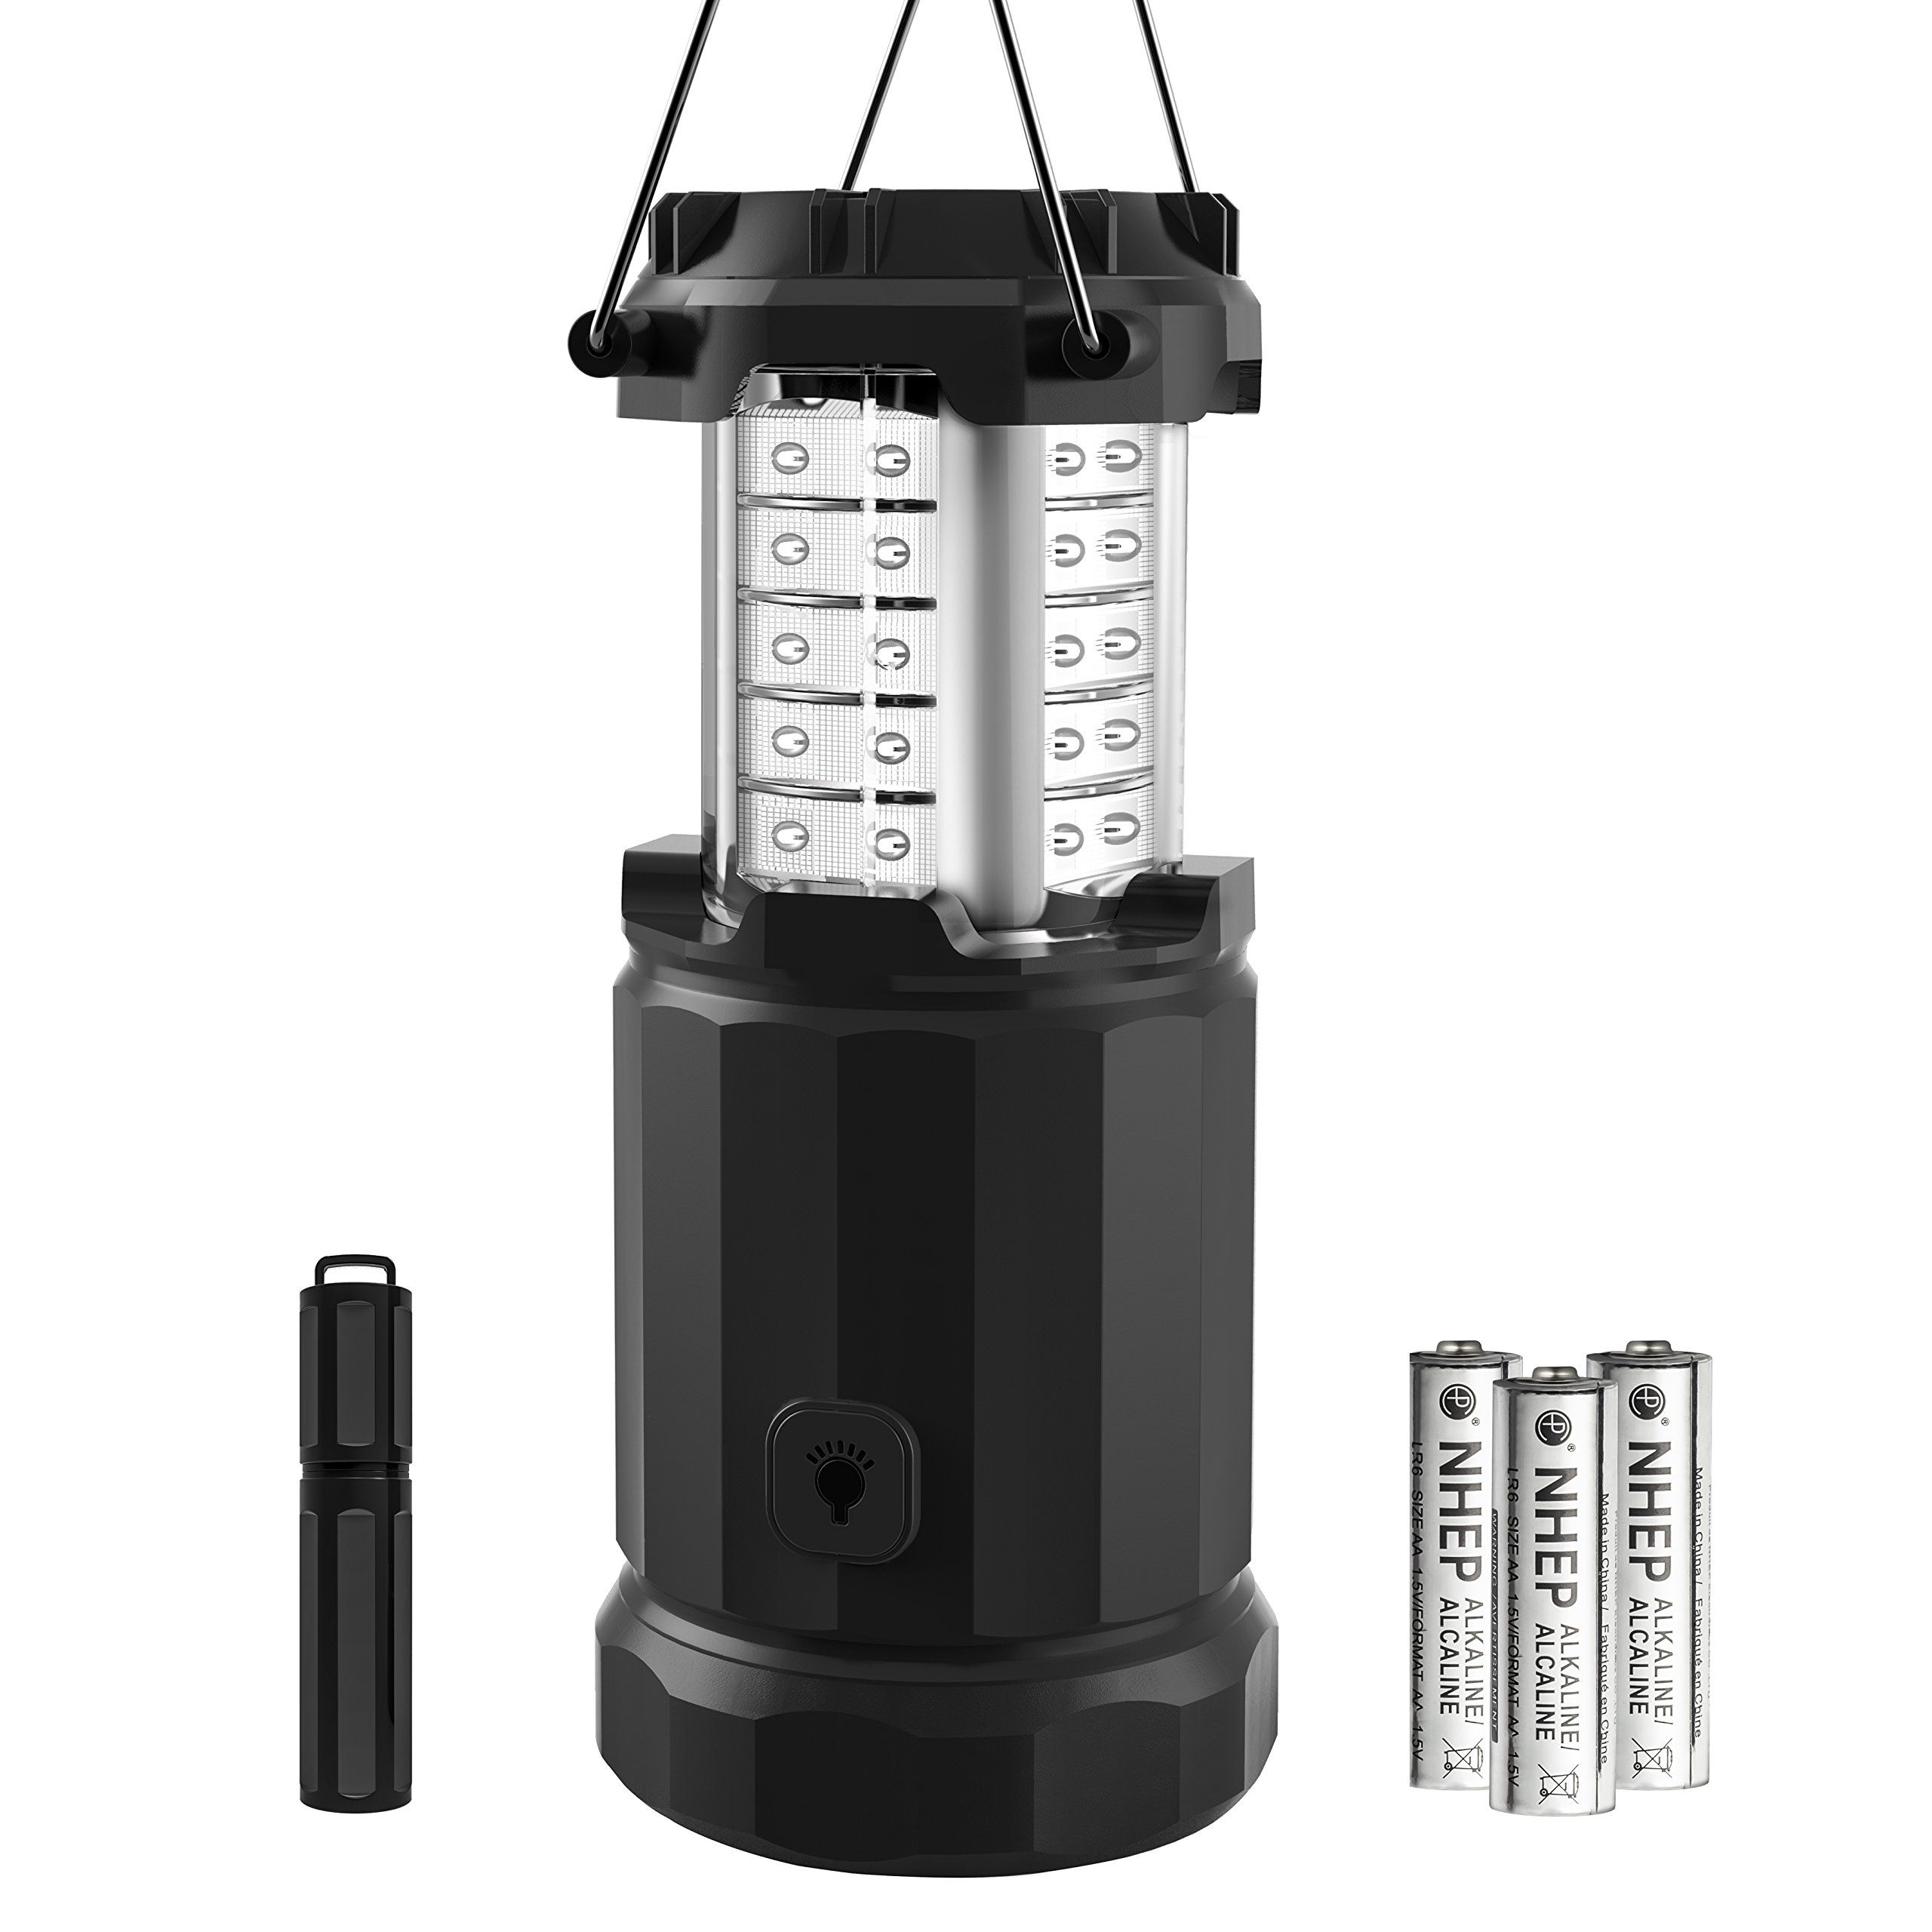 Best Rated In Outdoor Tabletop Lanterns & Helpful Customer Reviews Intended For Outdoor Table Lanterns (View 10 of 20)